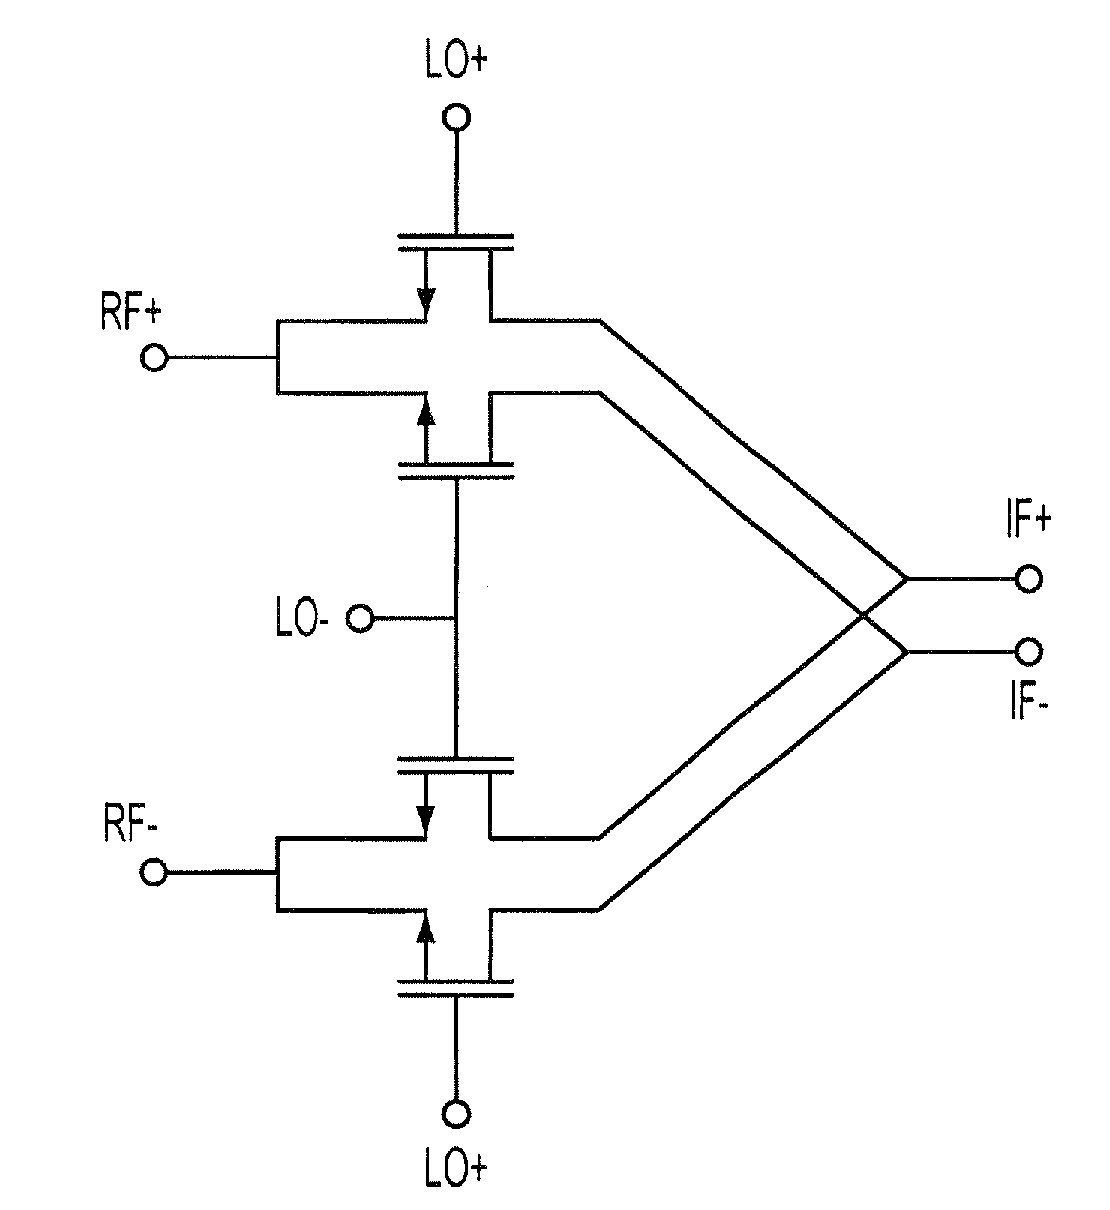 Embedded phase noise measurement system